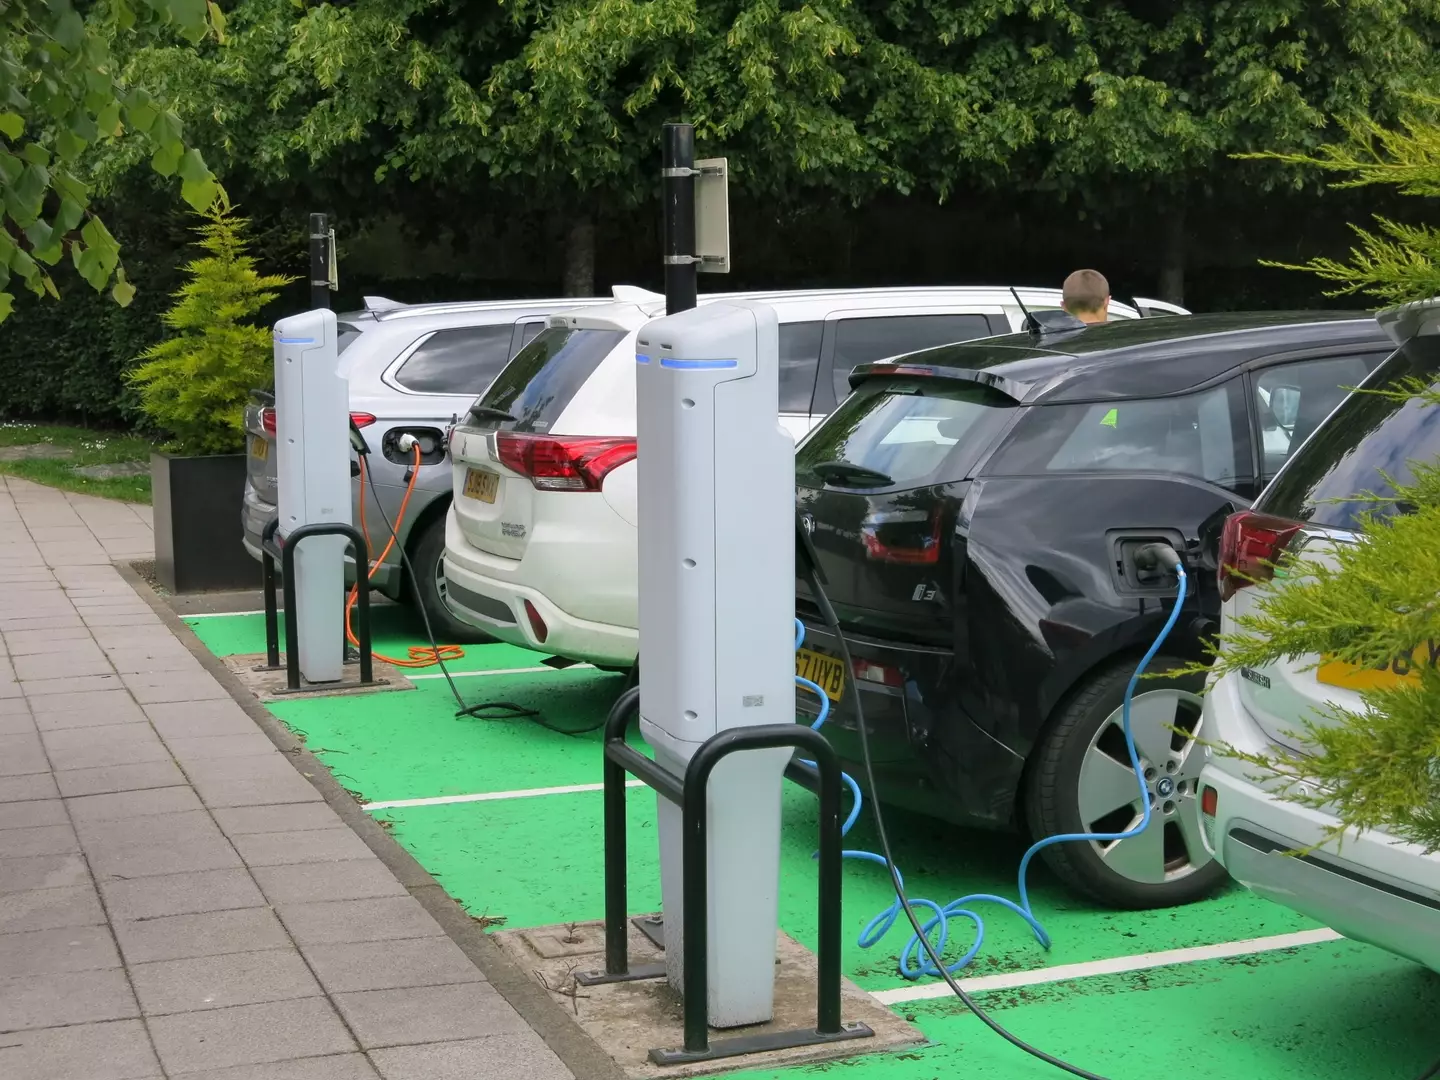 Electric car charging stations have been cropping up across the UK.